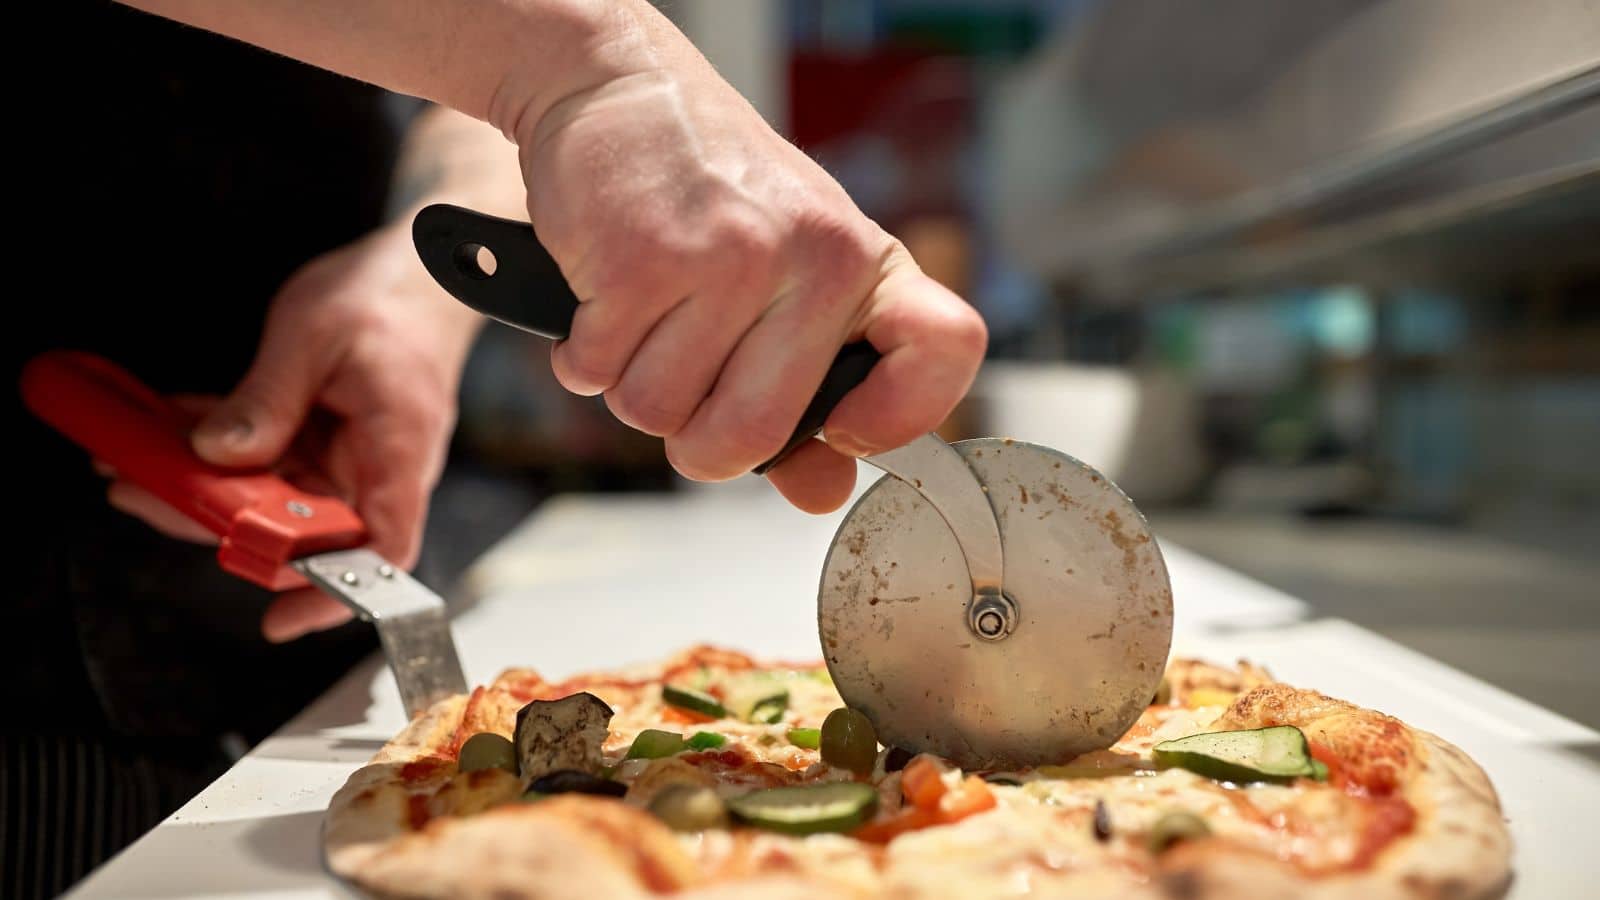 Cutting a pizza with a pizza cutter.